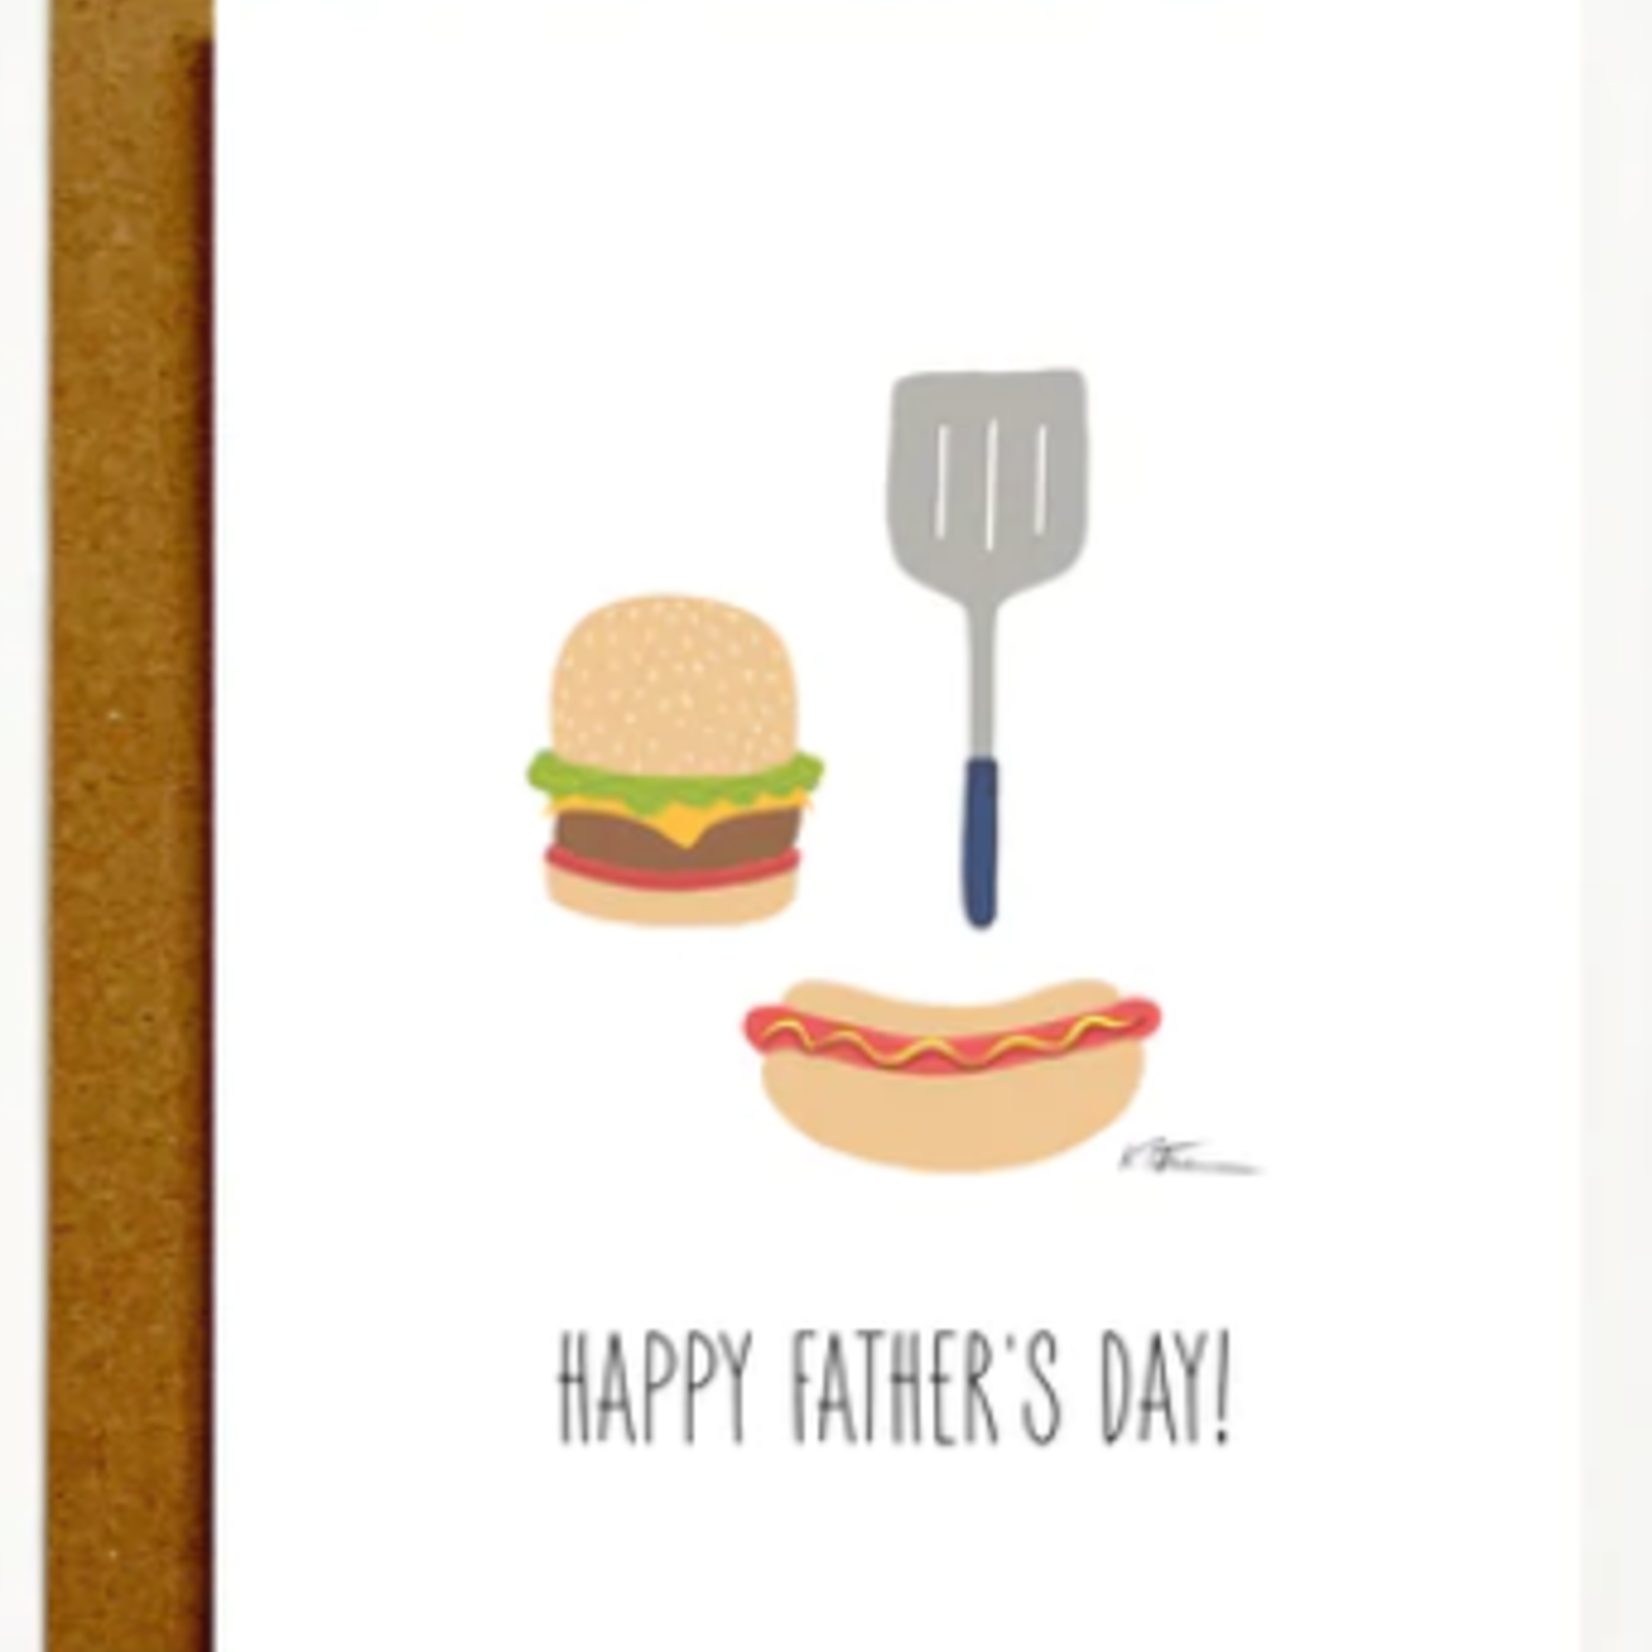 Happy Father's Day! Greeting Card